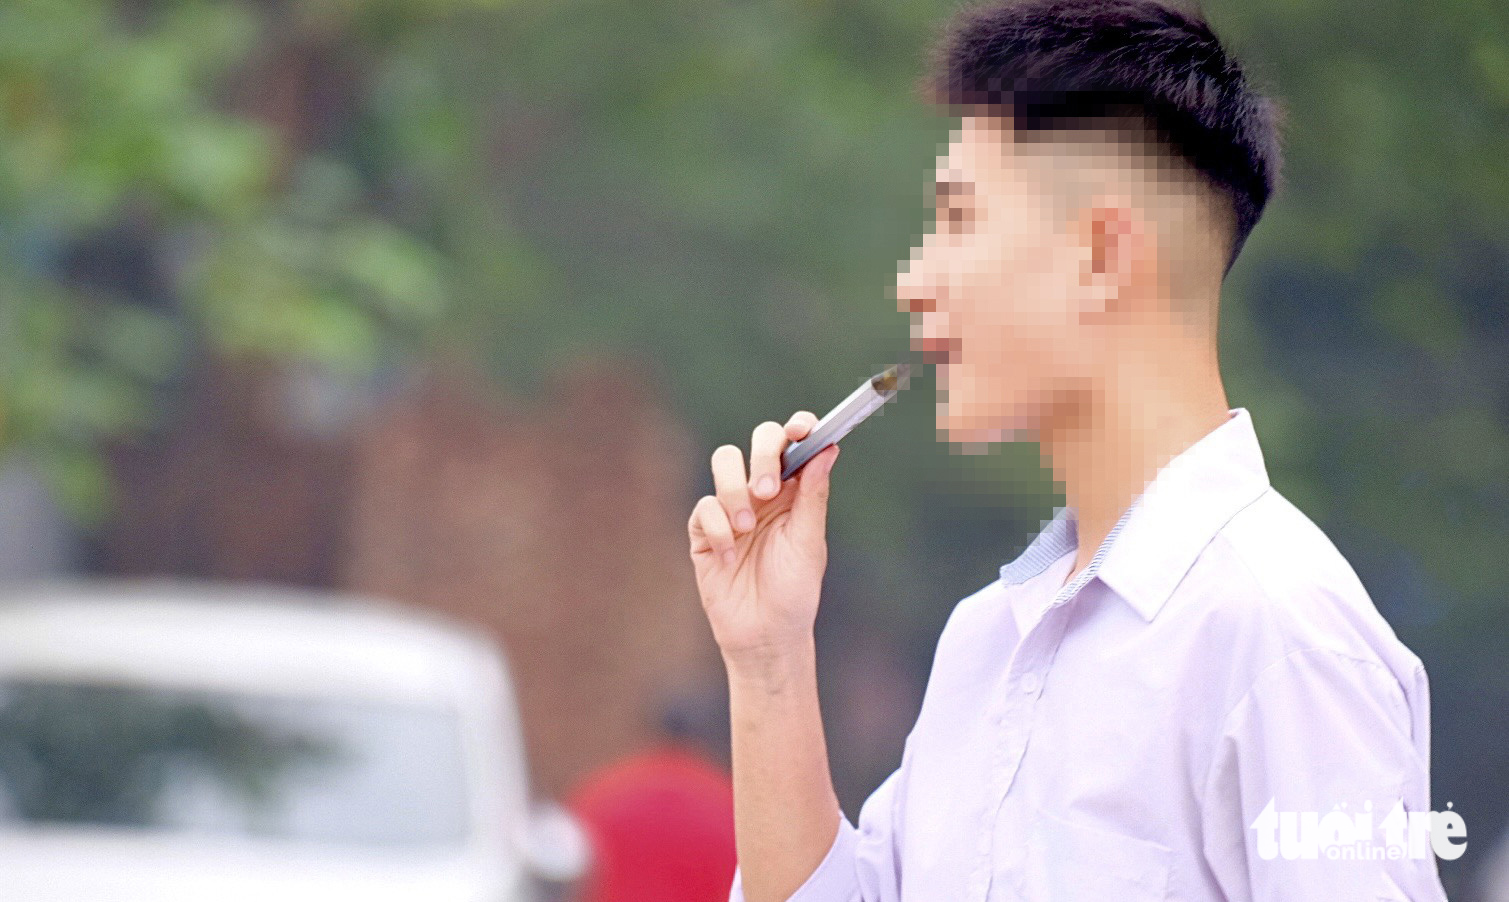 This student grabs an e-cigarette as soon as he walks out of the school gate of a high school in Hanoi city. Photo: Nguyen Bao / Tuoi Tre